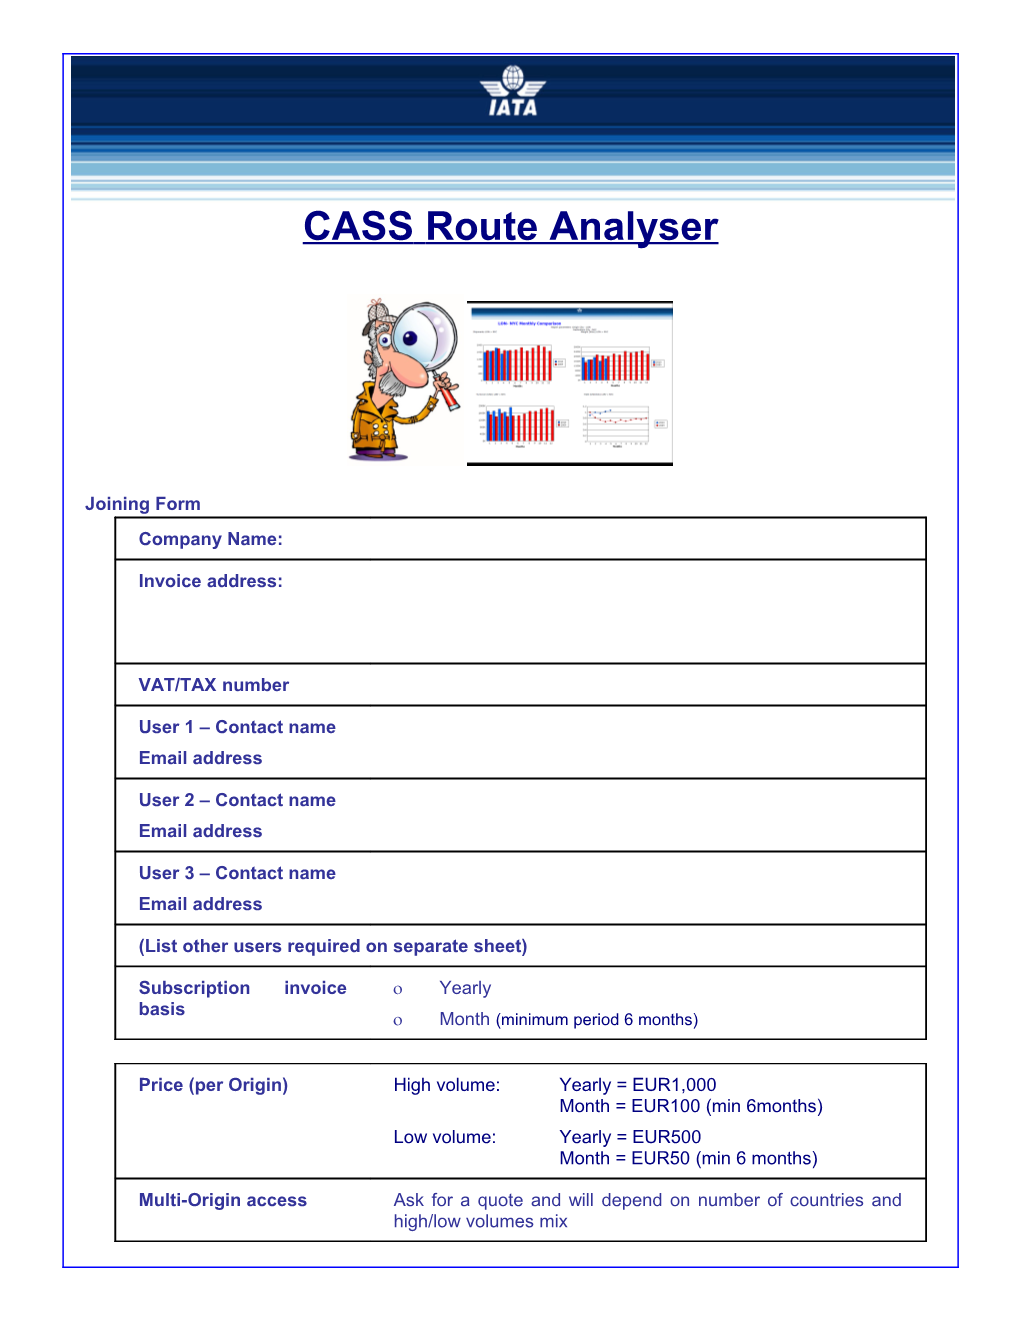 Casslink Plus - Route Analiser Joining Form